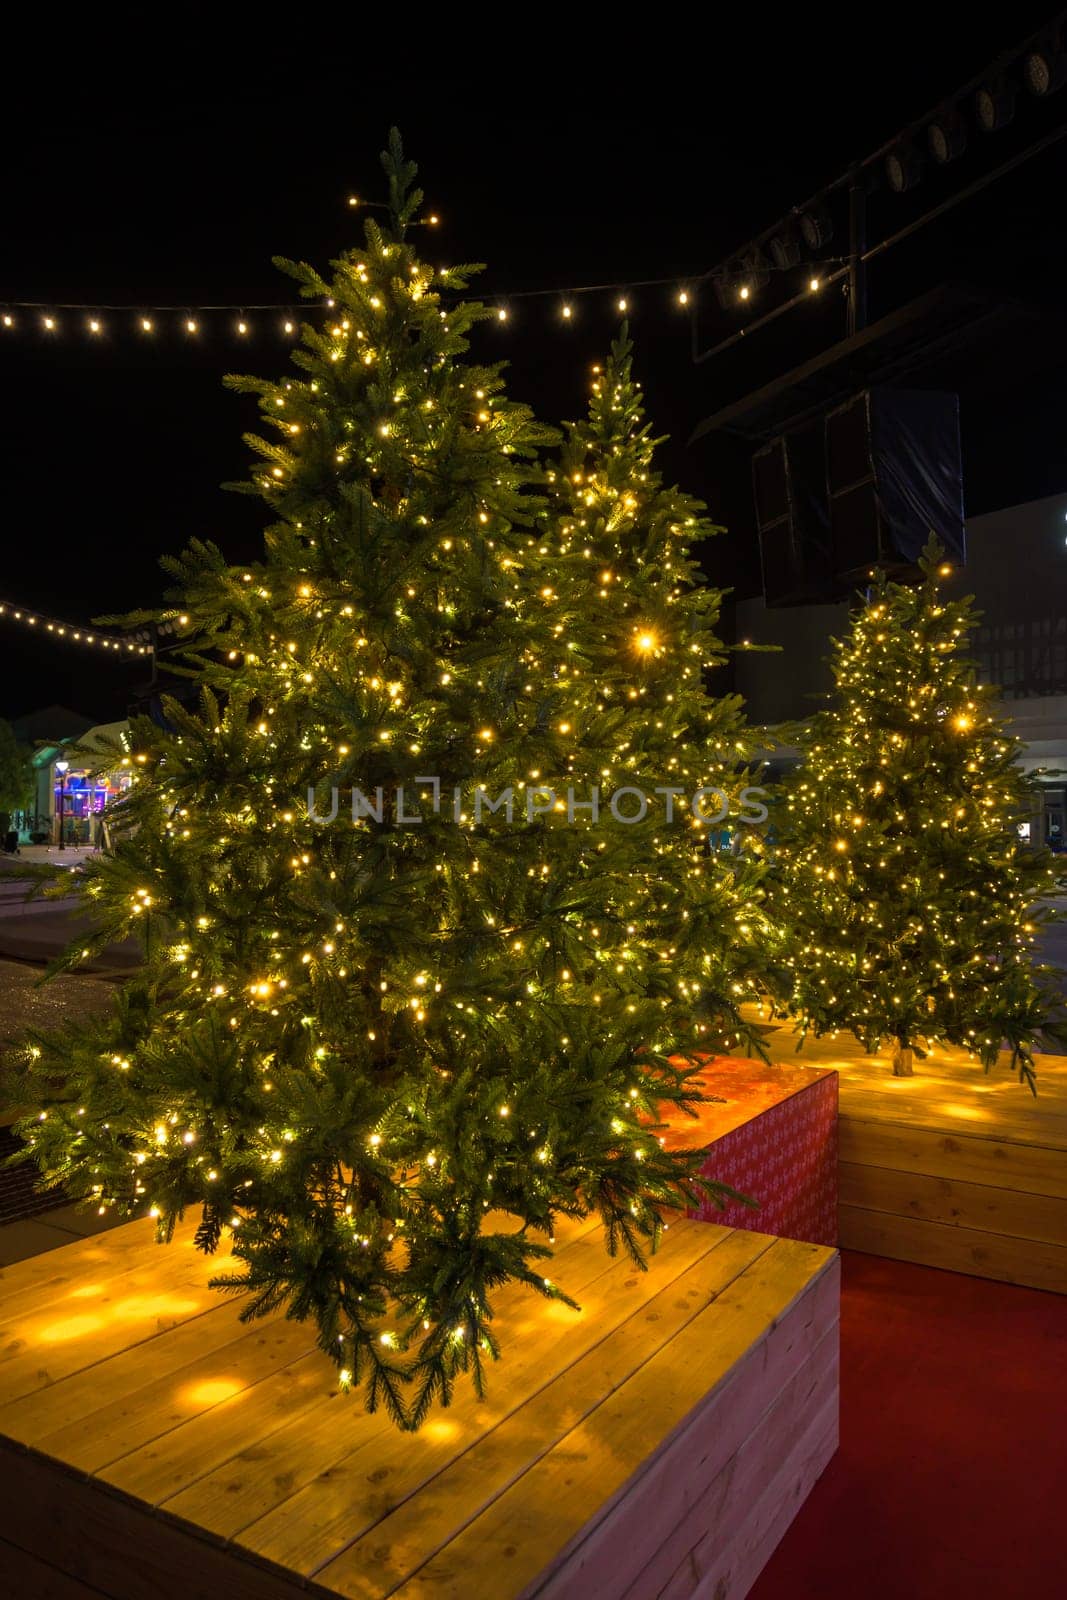 Christmas tree in pot with red decorations and lights outdoors near grey loft building by carlosviv